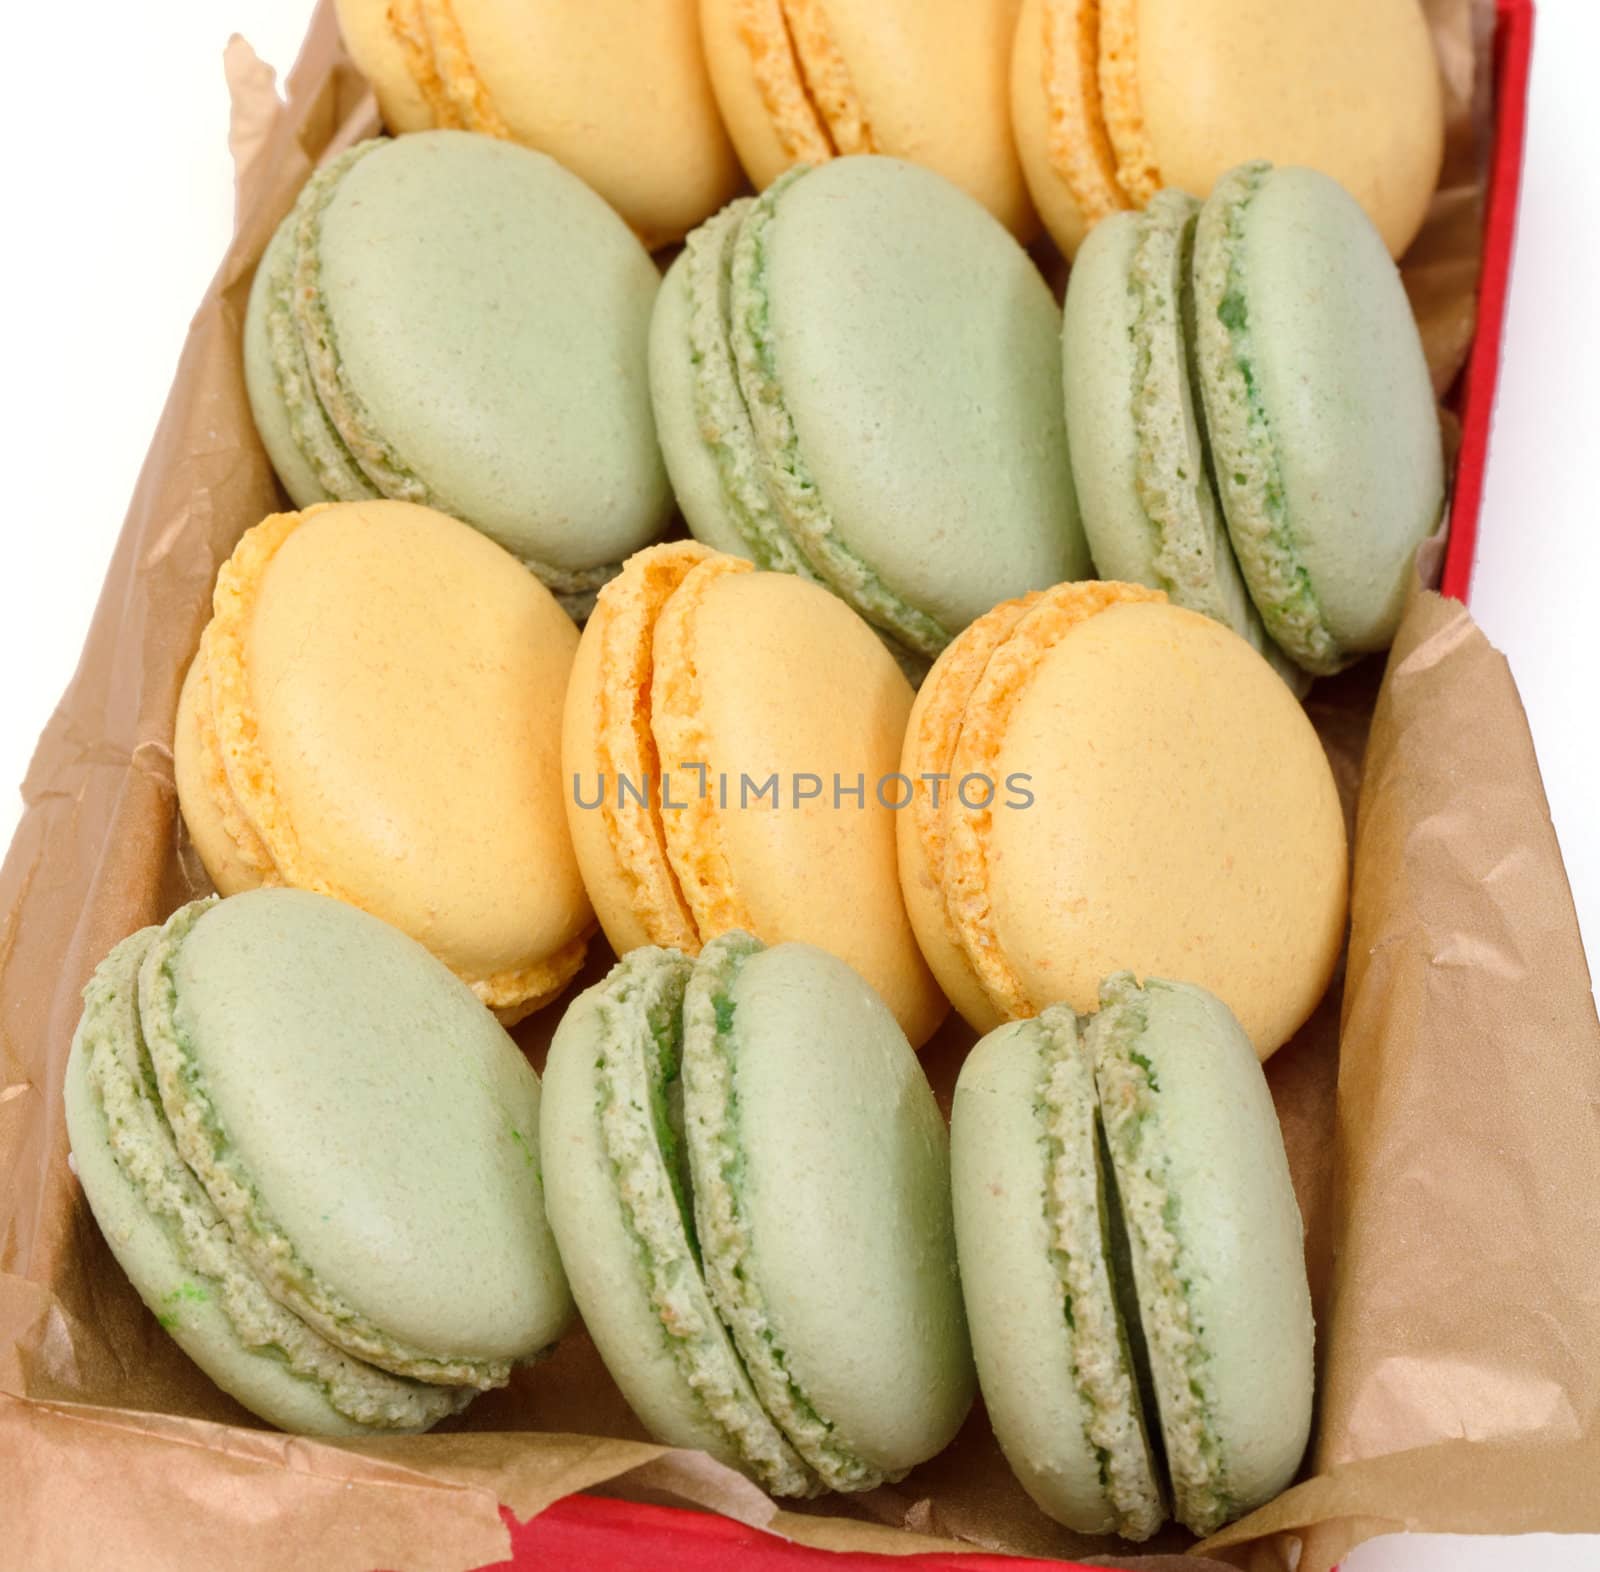 Colorful Macaron in paper box by Discovod